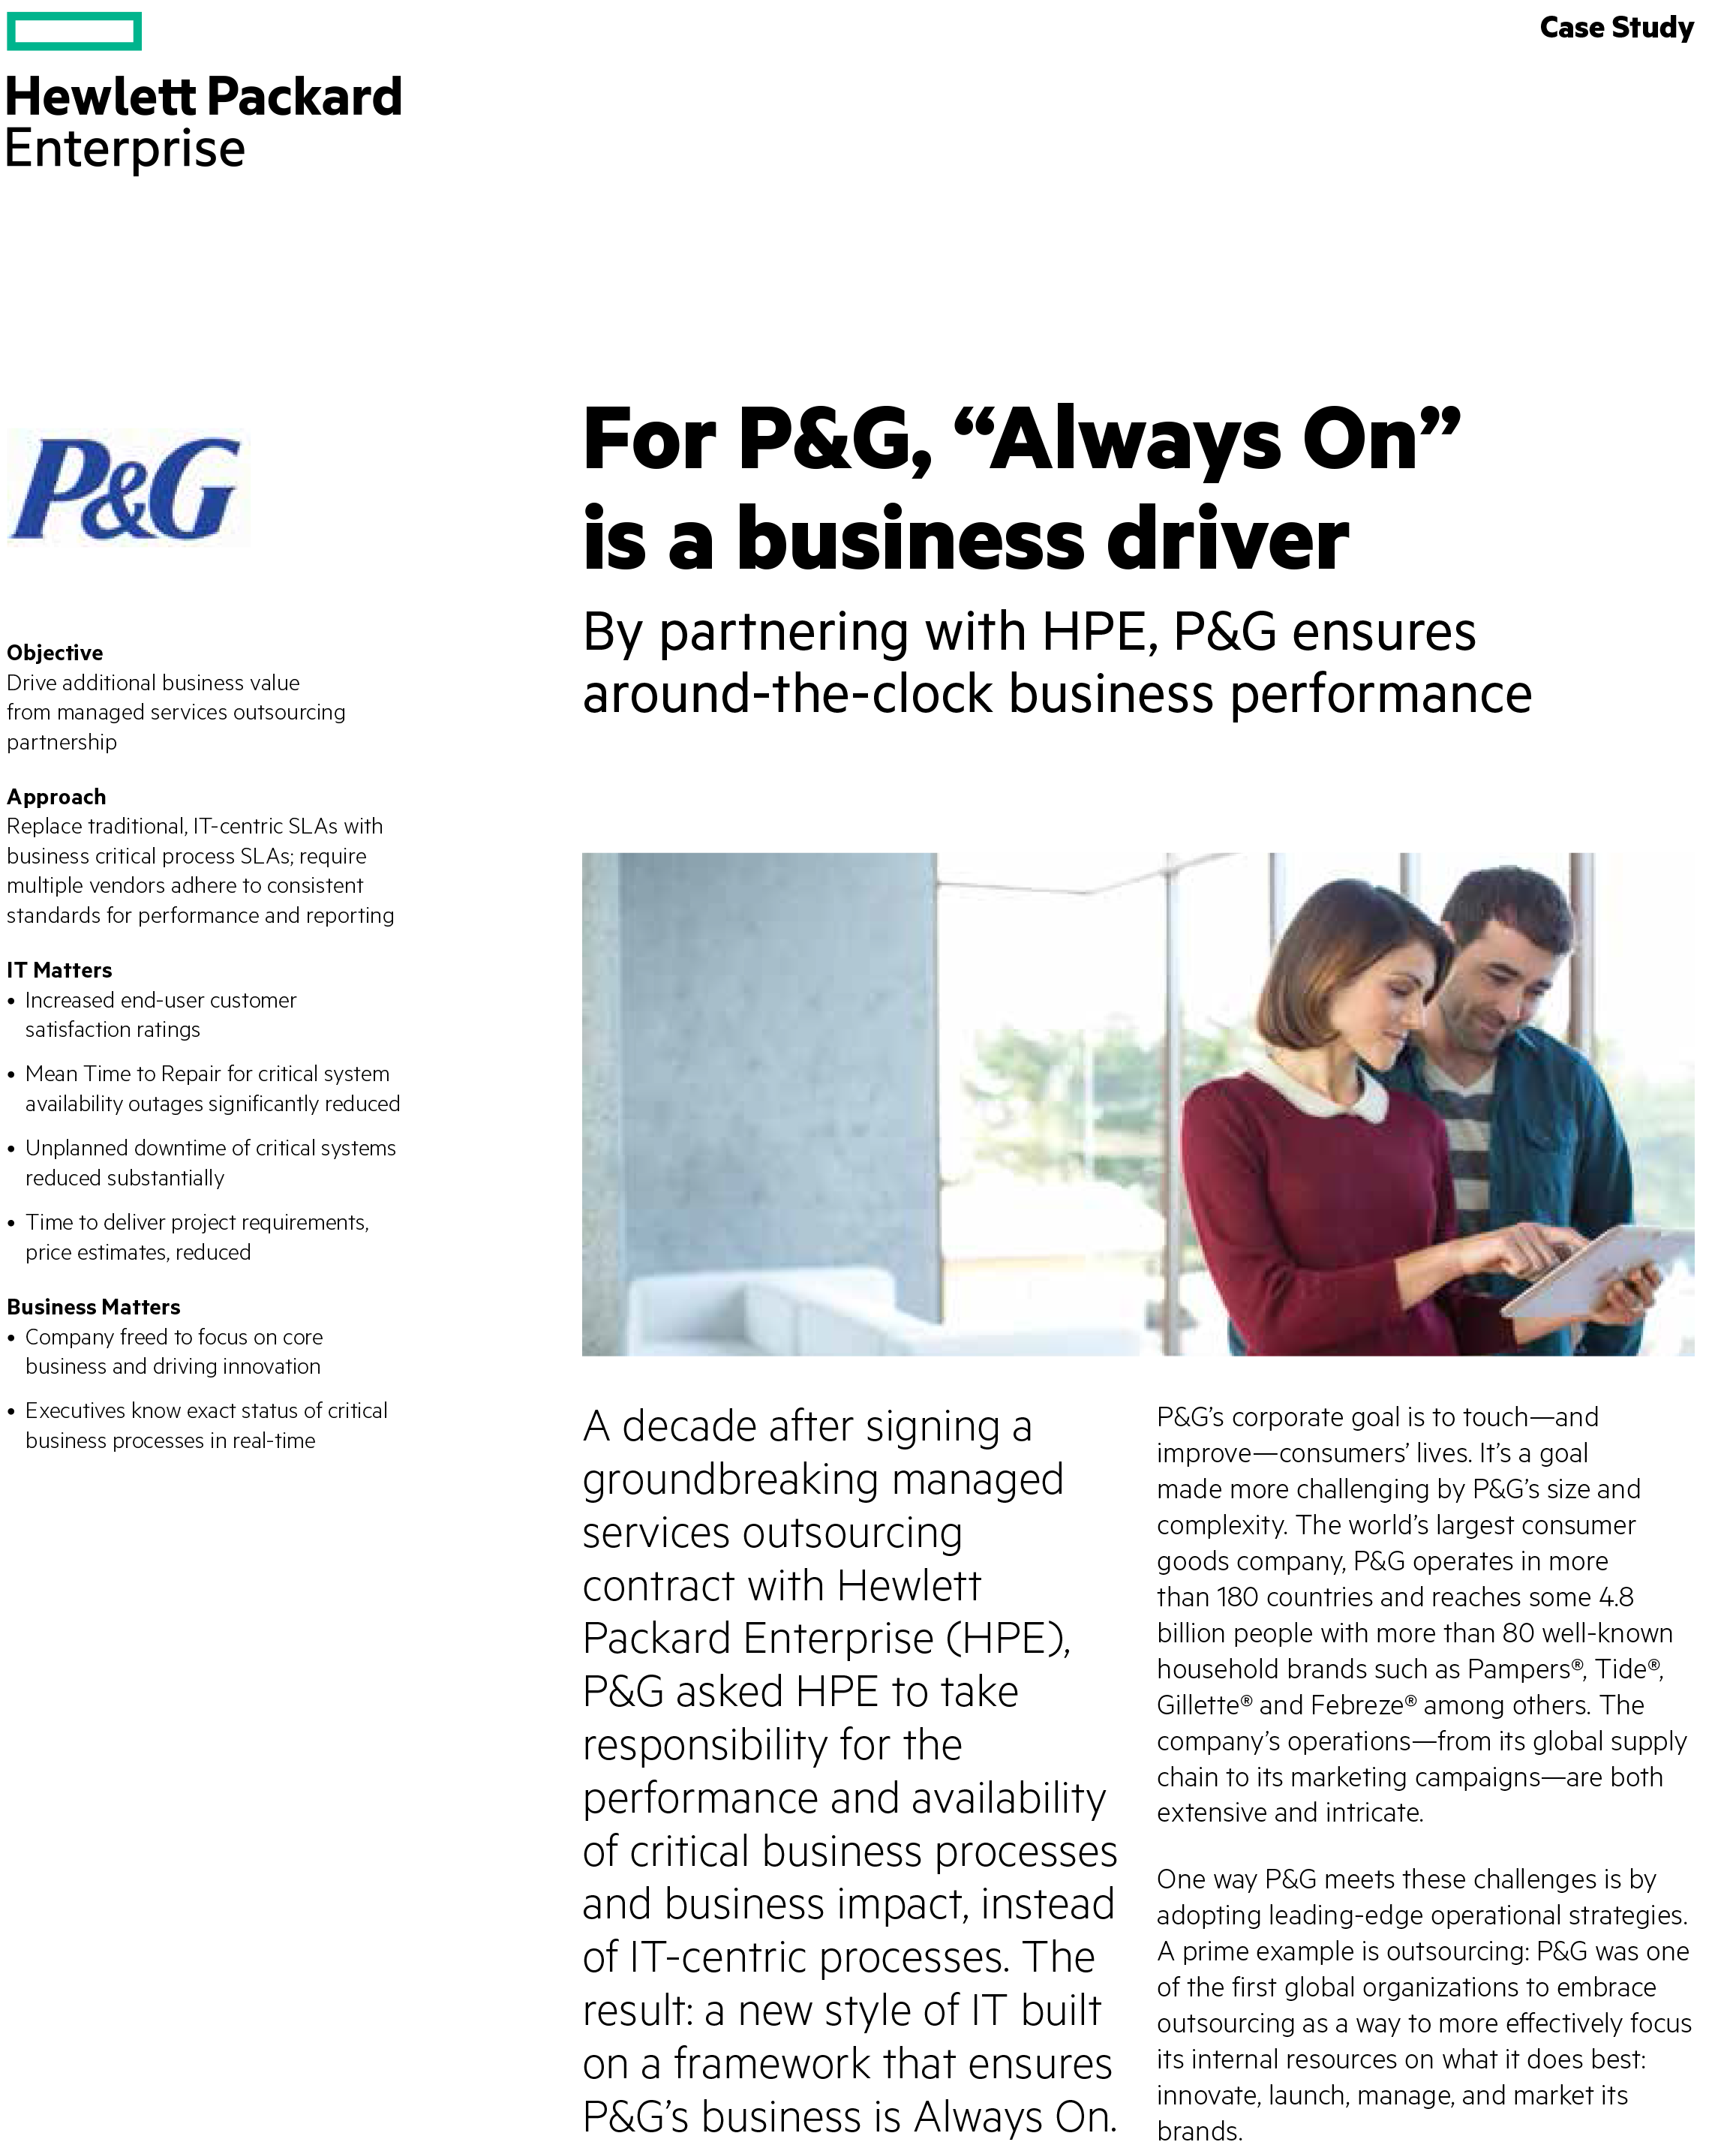 HPE Case Study - For P&G 'Always on' is a business Driver